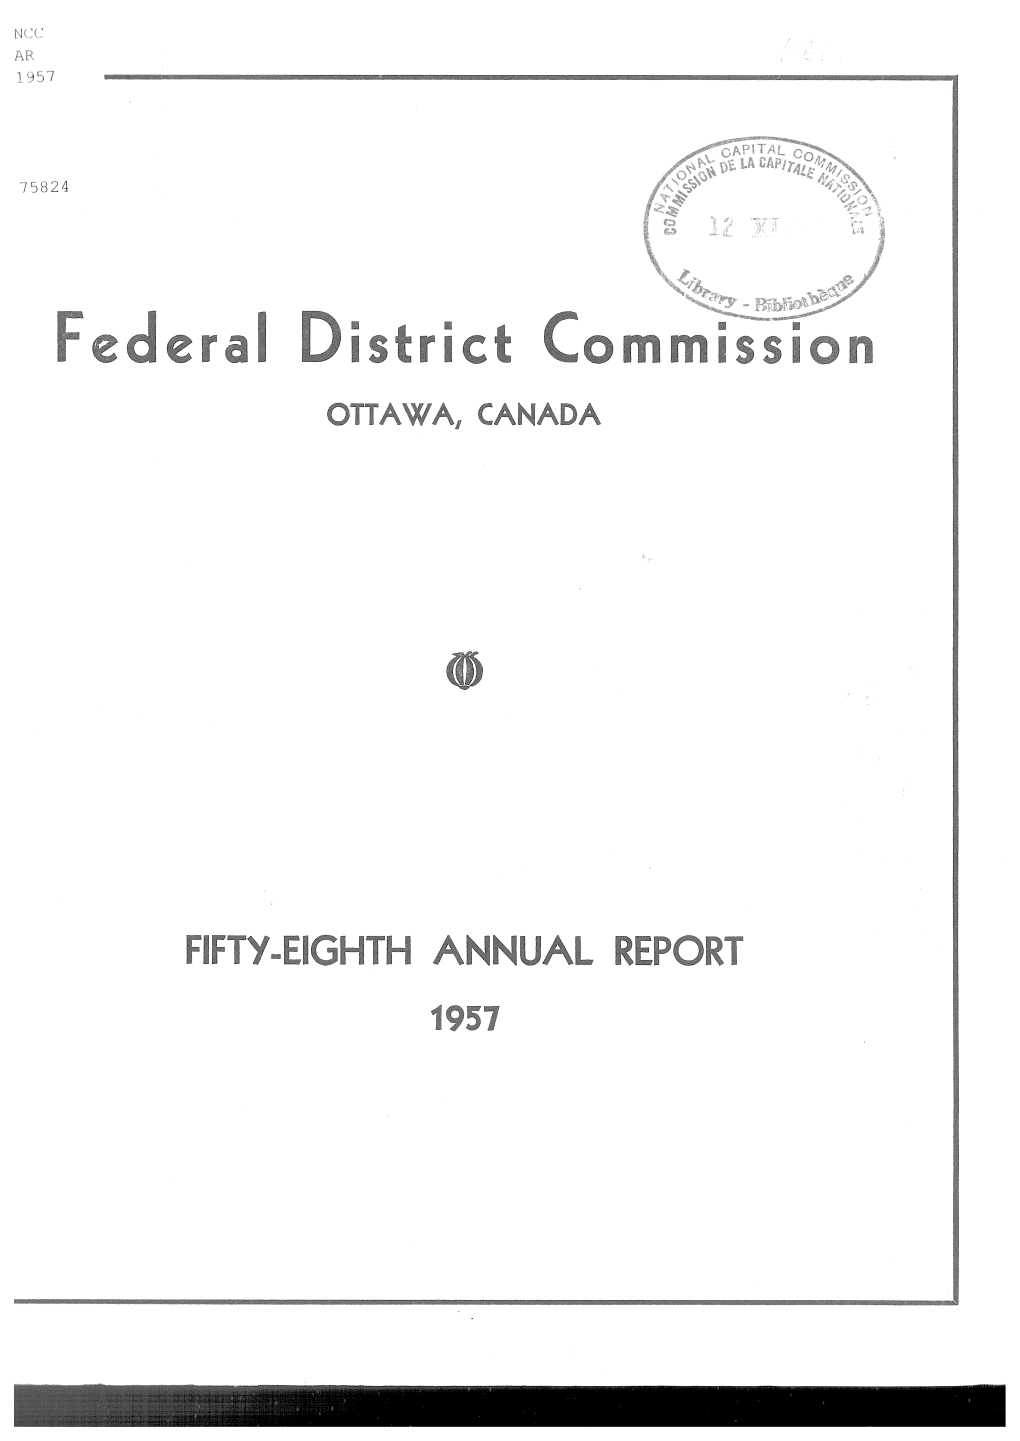 1957-Annual-Report-Of-The-Federal